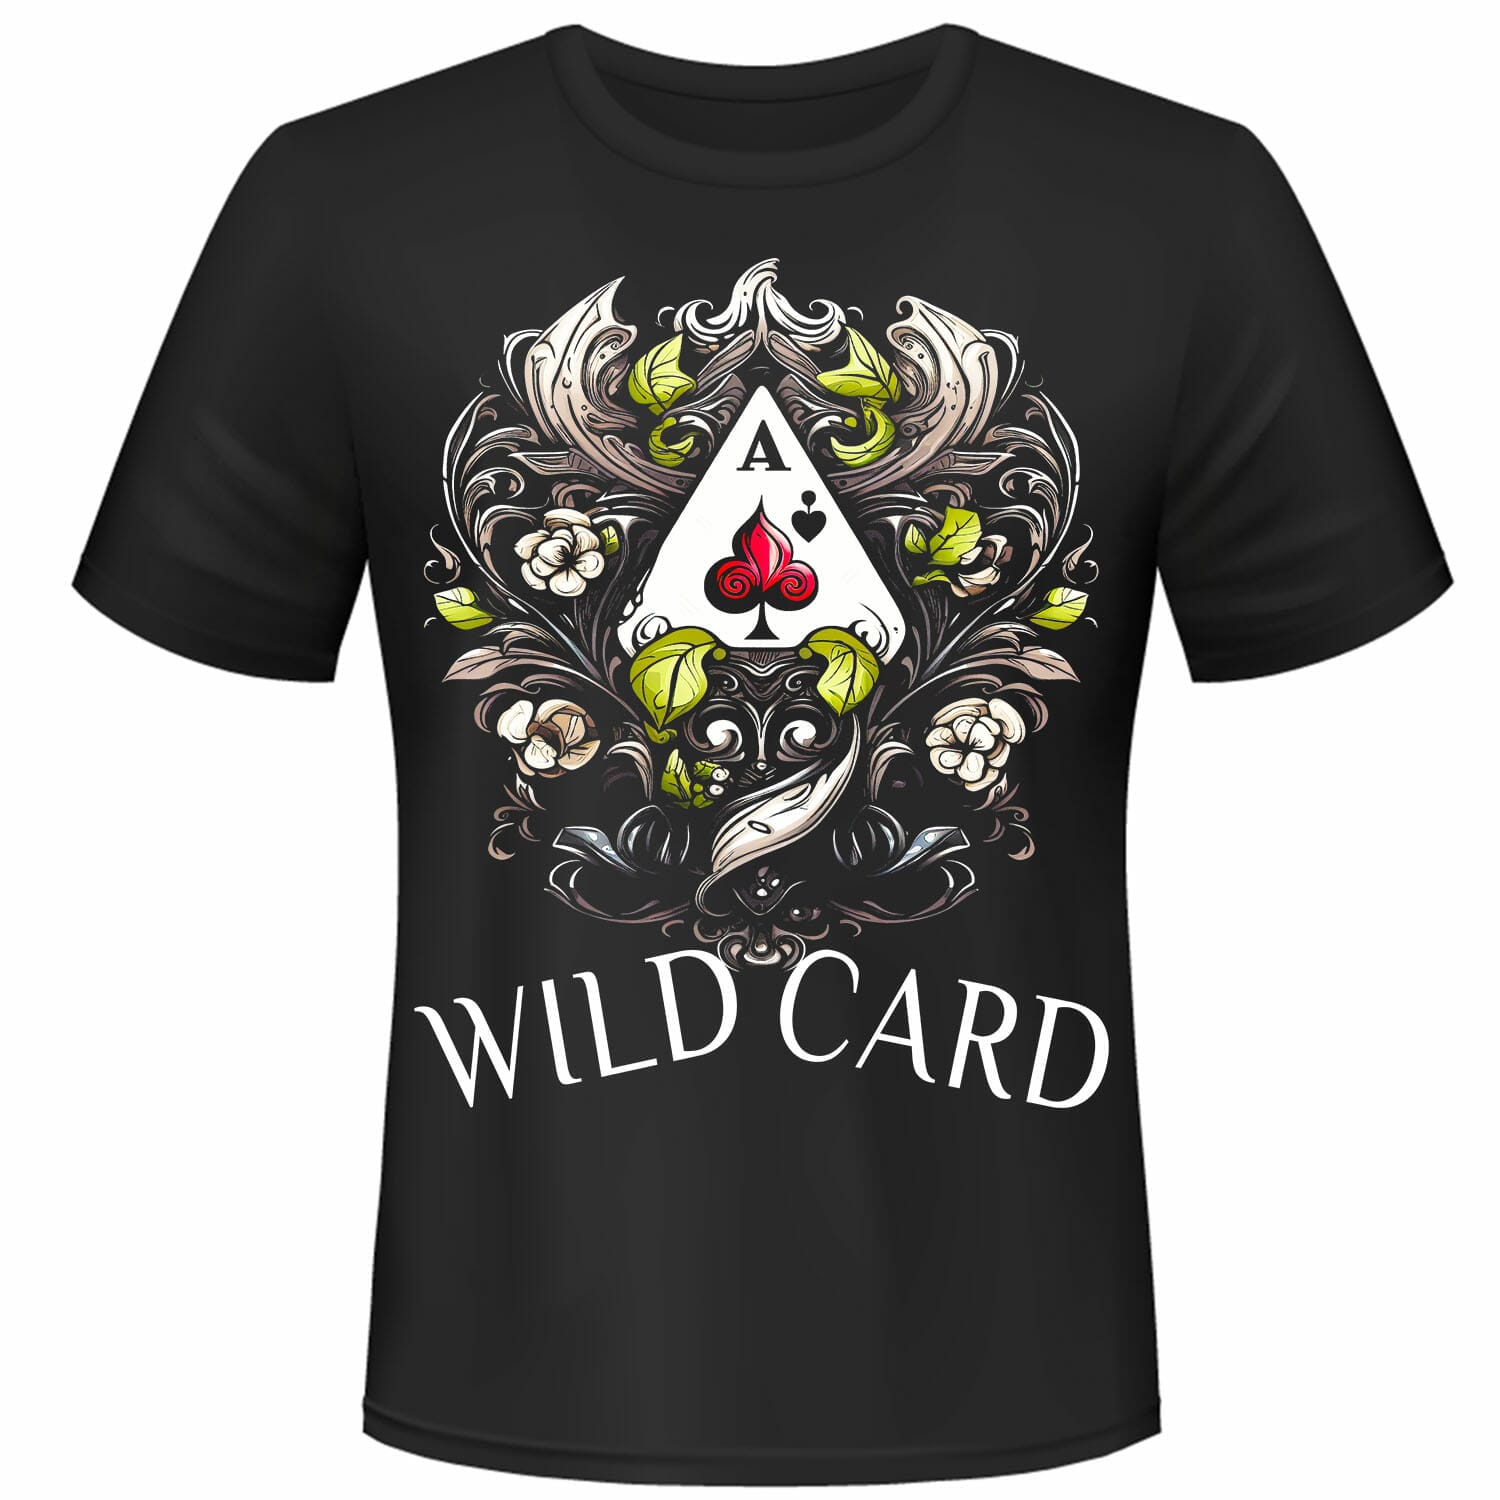 Wild Card - Free T-Shirt Design For Card Players